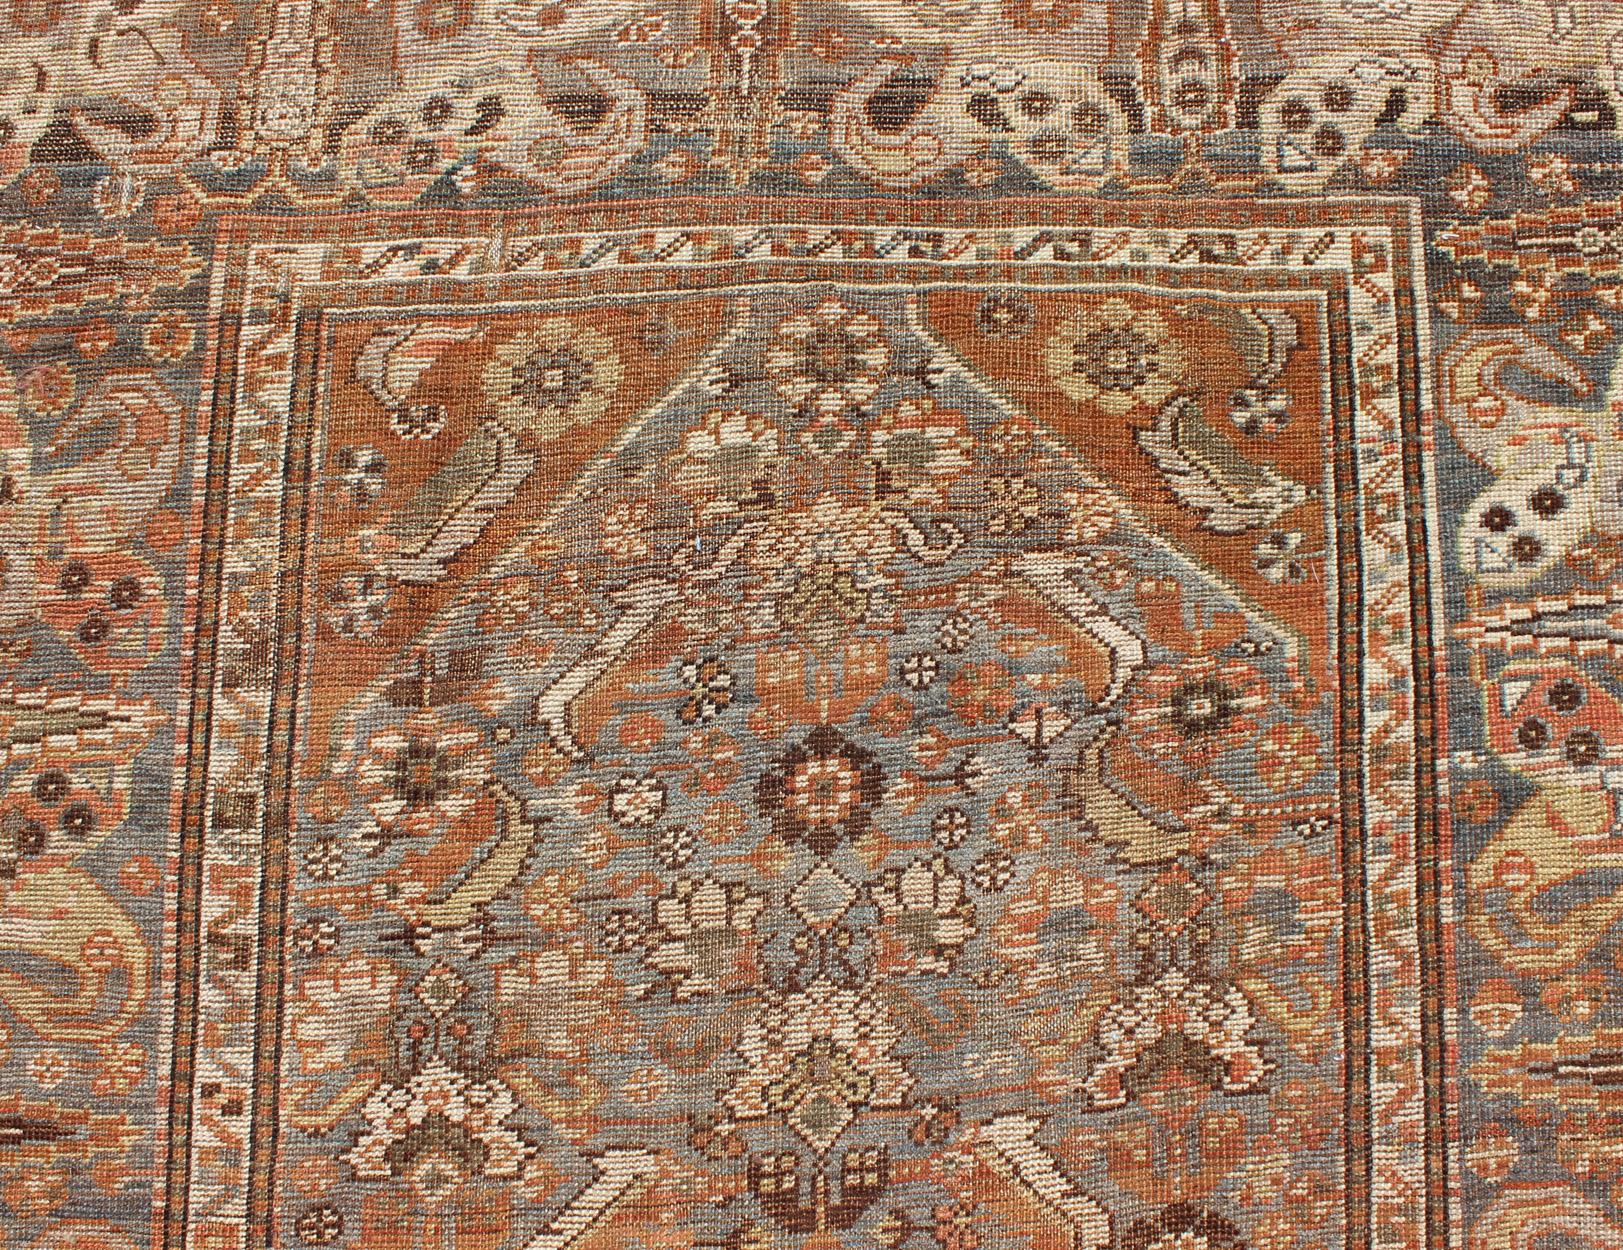 Antique Persian Qashqai Small Gallery Rug with Expansive Sub-Geometric Design 4